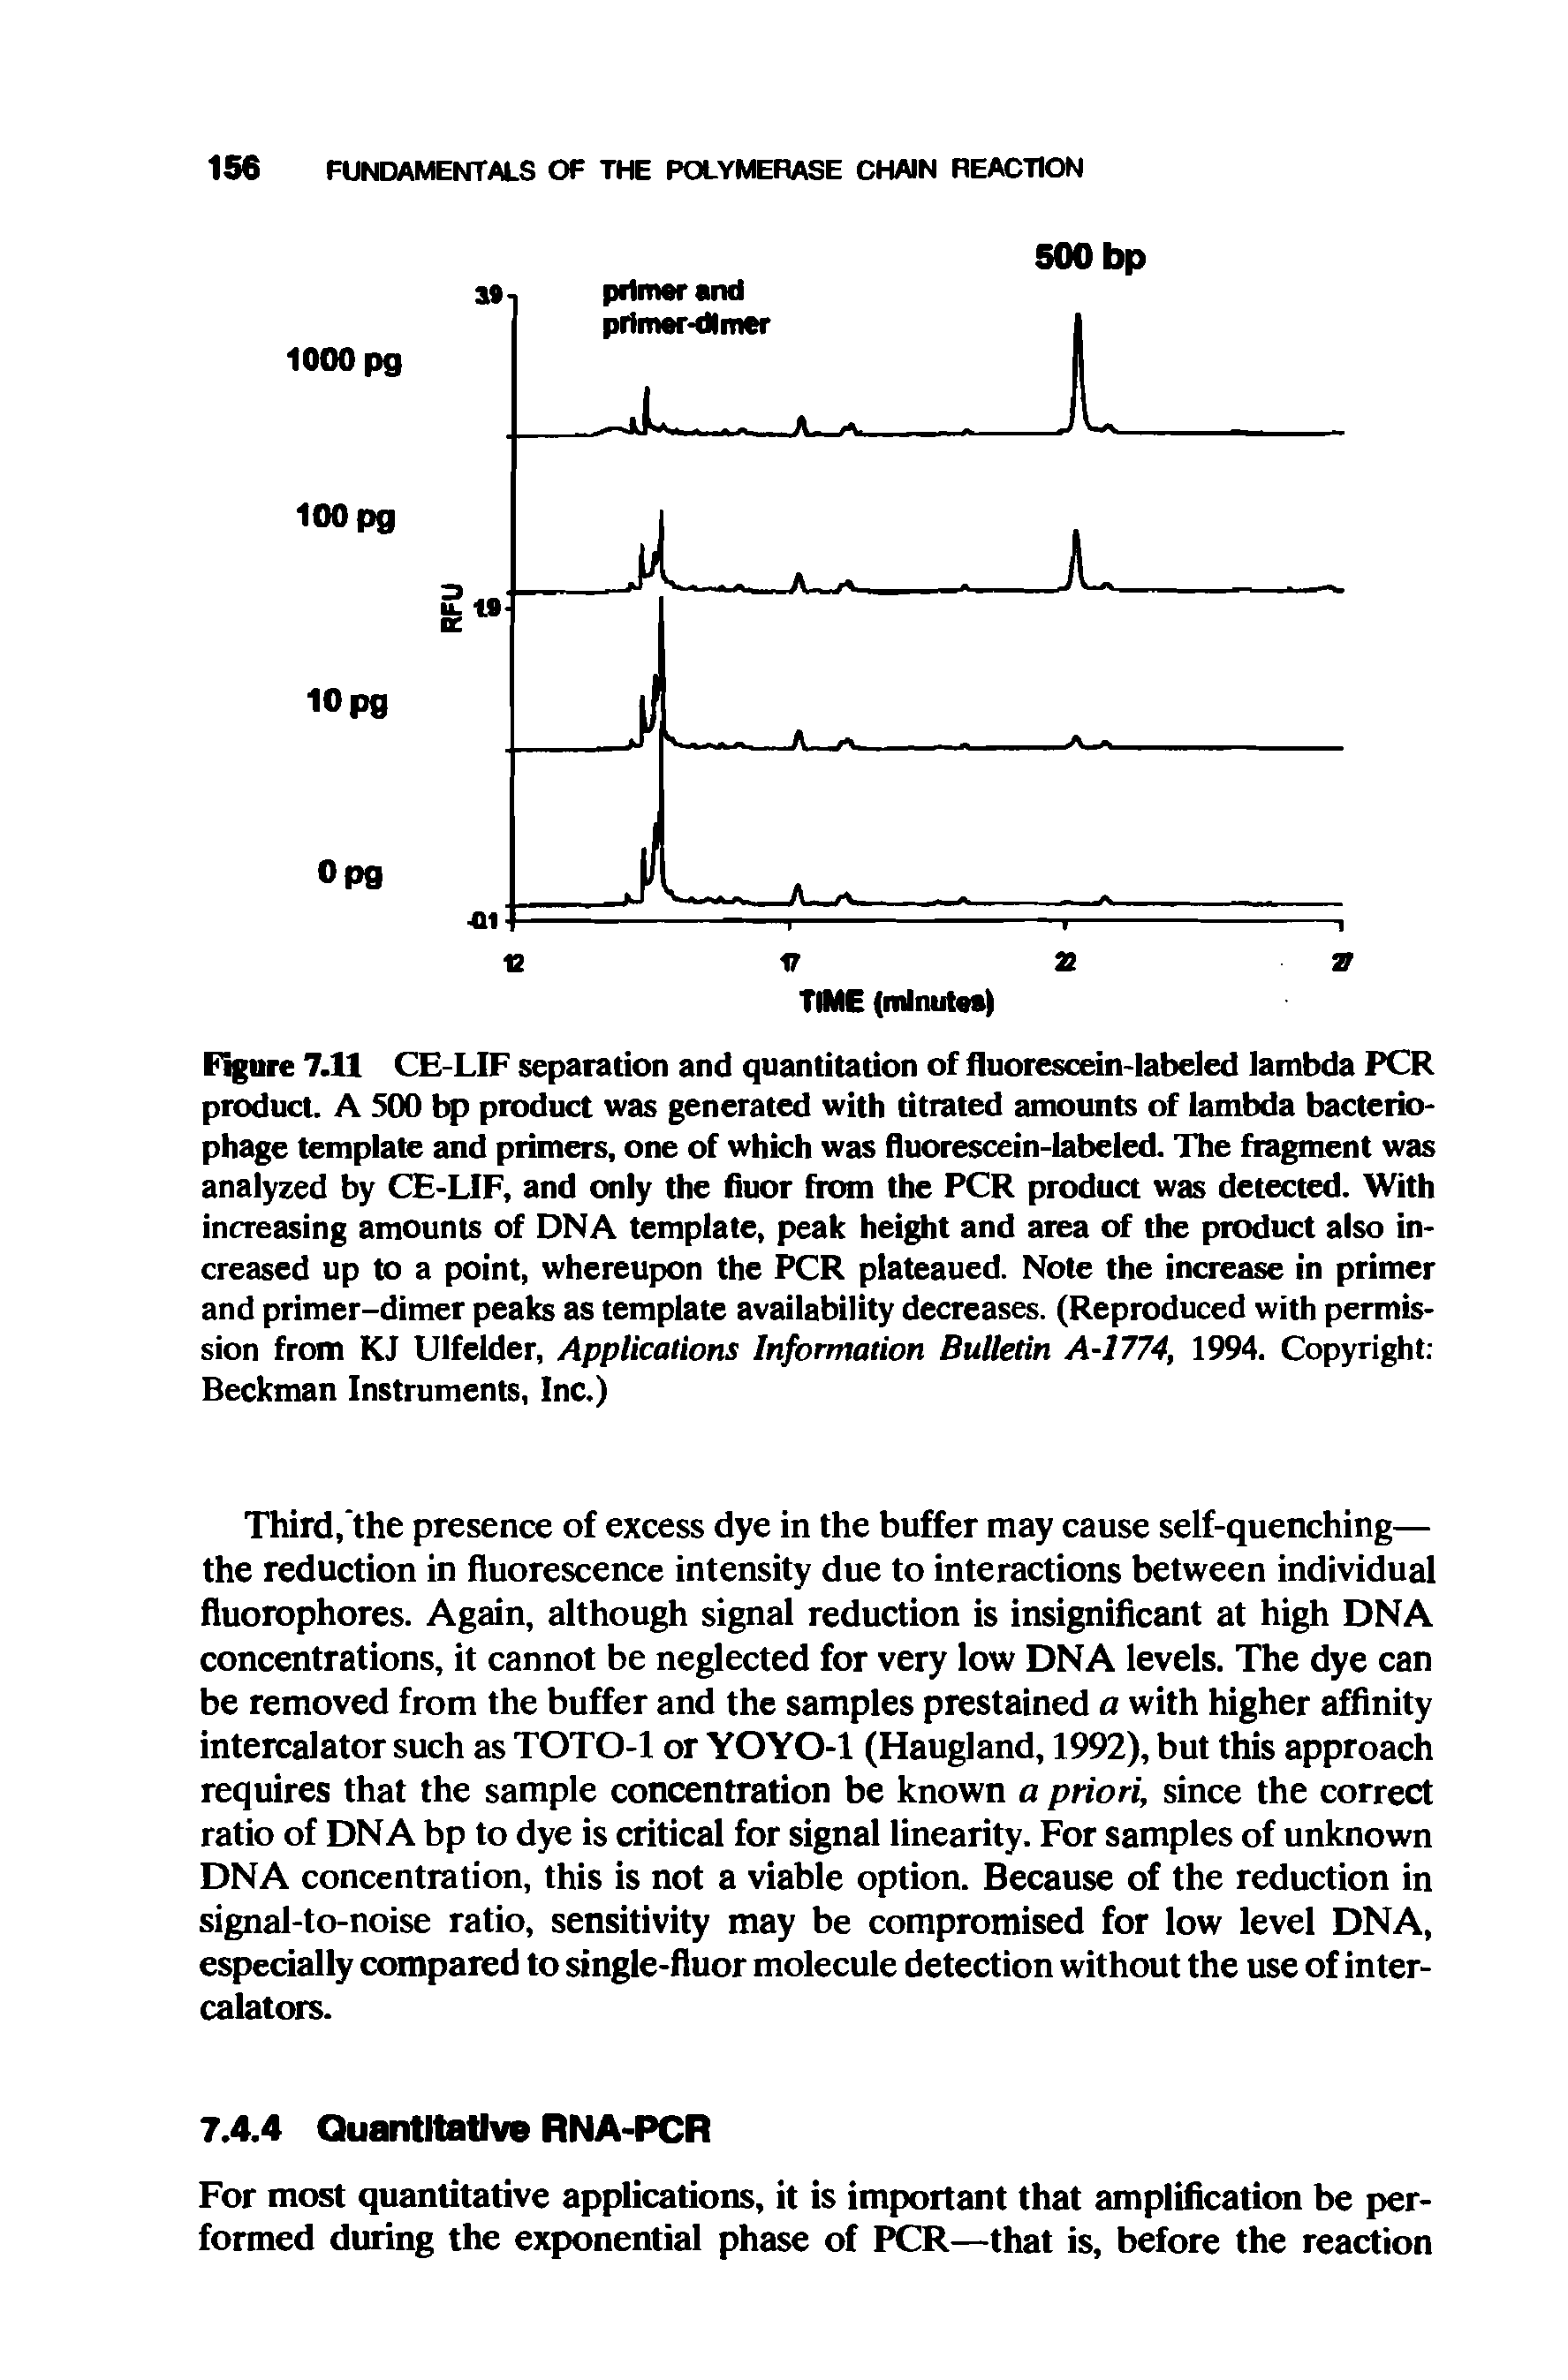 Figure 7.11 CE-LIF separation and quantitation of fluorescein-labeled lambda PCR product. A 500 bp product was generated with titrated amounts of lambda bacteriophage template and primers, one of which was fluorescein-labeled. The fragment was analyzed by CE-LIF, and only the fiuor from the PCR product was detected. With increasing amounts of DNA template, peak height and area of the product also increased up to a point, whereupon the PCR plateaued. Note the increase in primer and primer-dimer peaks as template availability decreases. (Reproduced with permission from KJ Ulfelder, Applications Information Bulletin A-1774, 1994. Copyright Beckman Instruments, Inc.)...